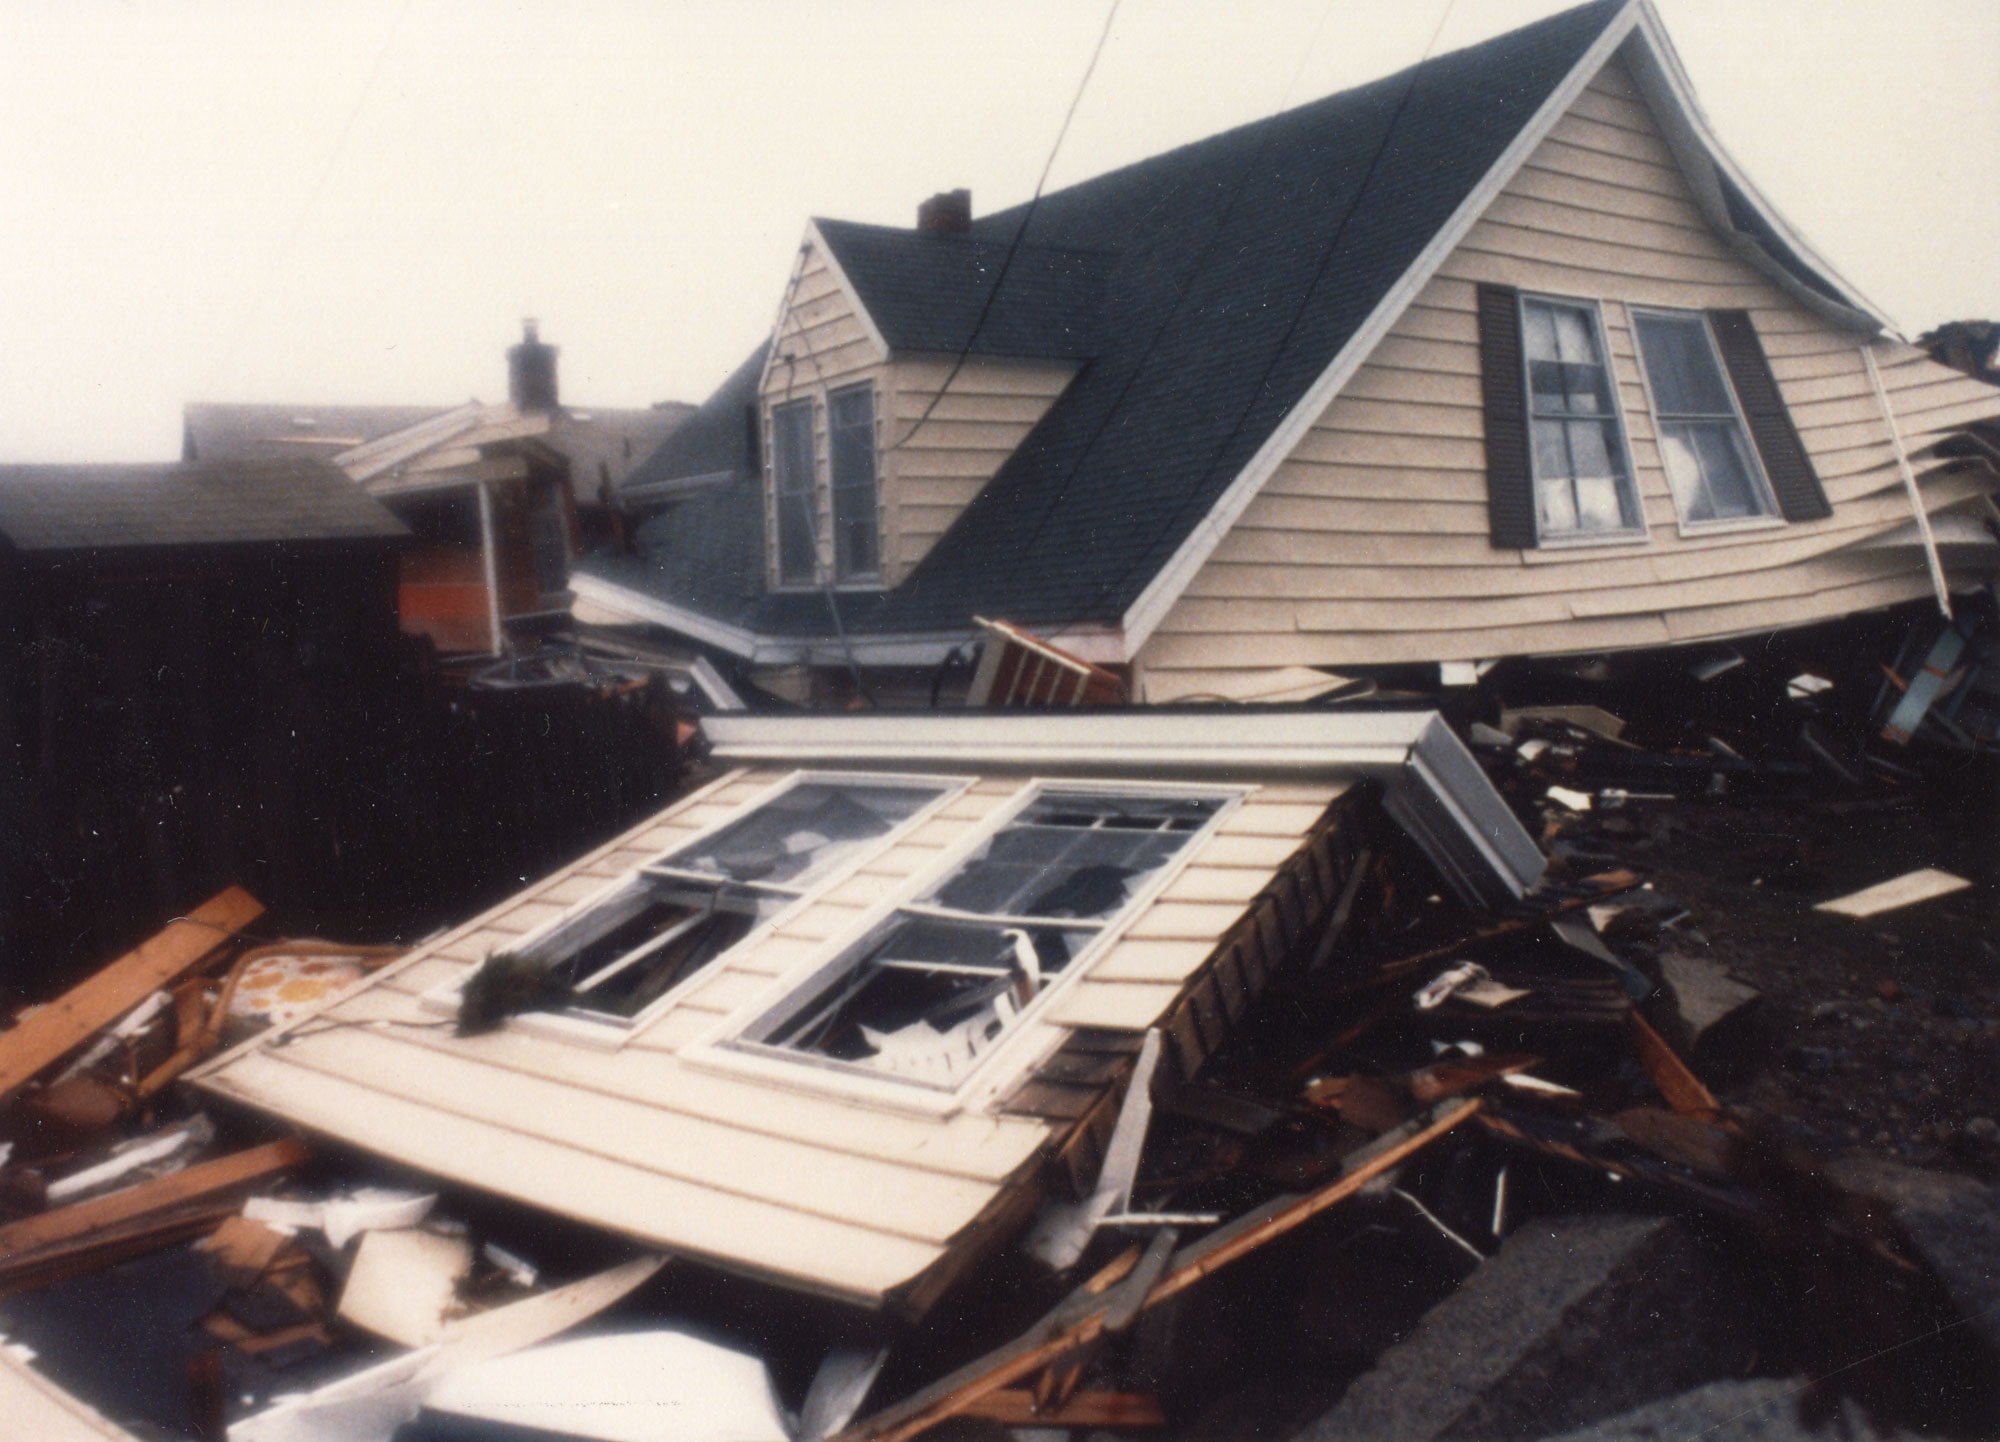 Photograph of a house in Massachusetts that was damaged during a storm in 1991. The photograph shows a house with beige or light yellow siding and a black roof. The ground floor of the house has been completely destroyed, and the roof is lying on a pile of debris.